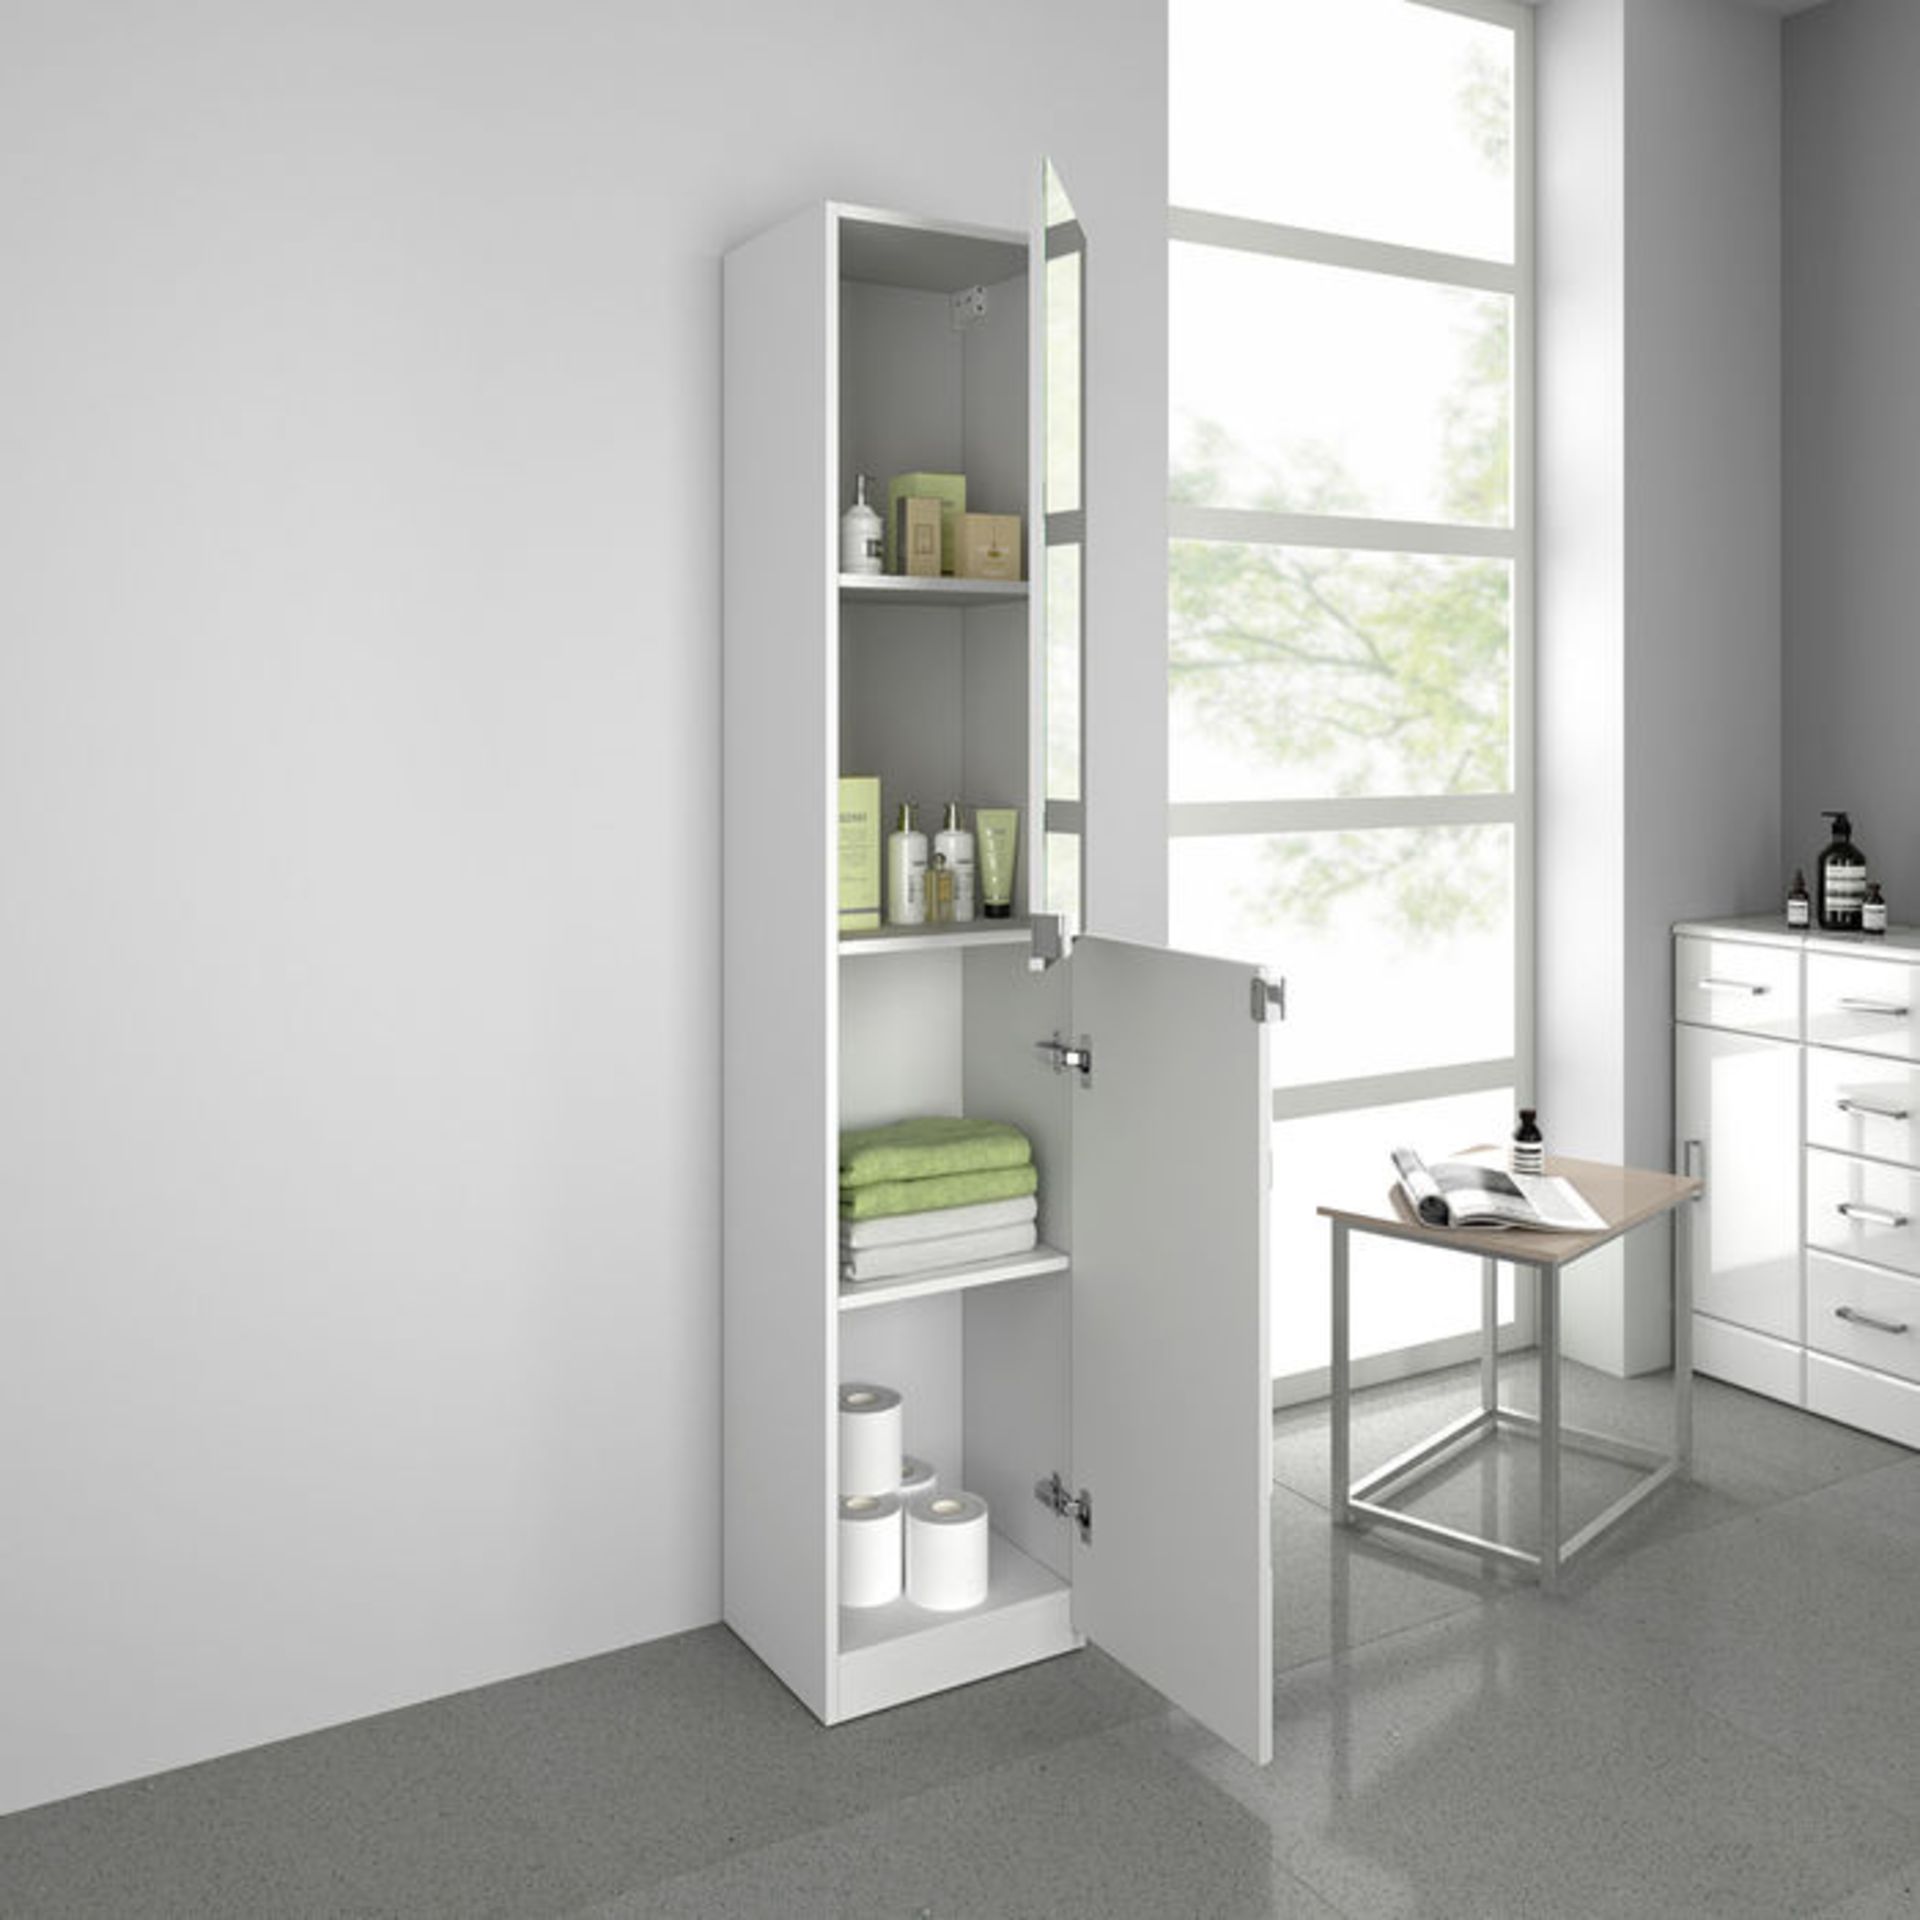 (NY183) 1700x350mm Mirrored Door Matte White Tall Storage Cabinet - Floor Standing. Enjoy the - Image 3 of 4